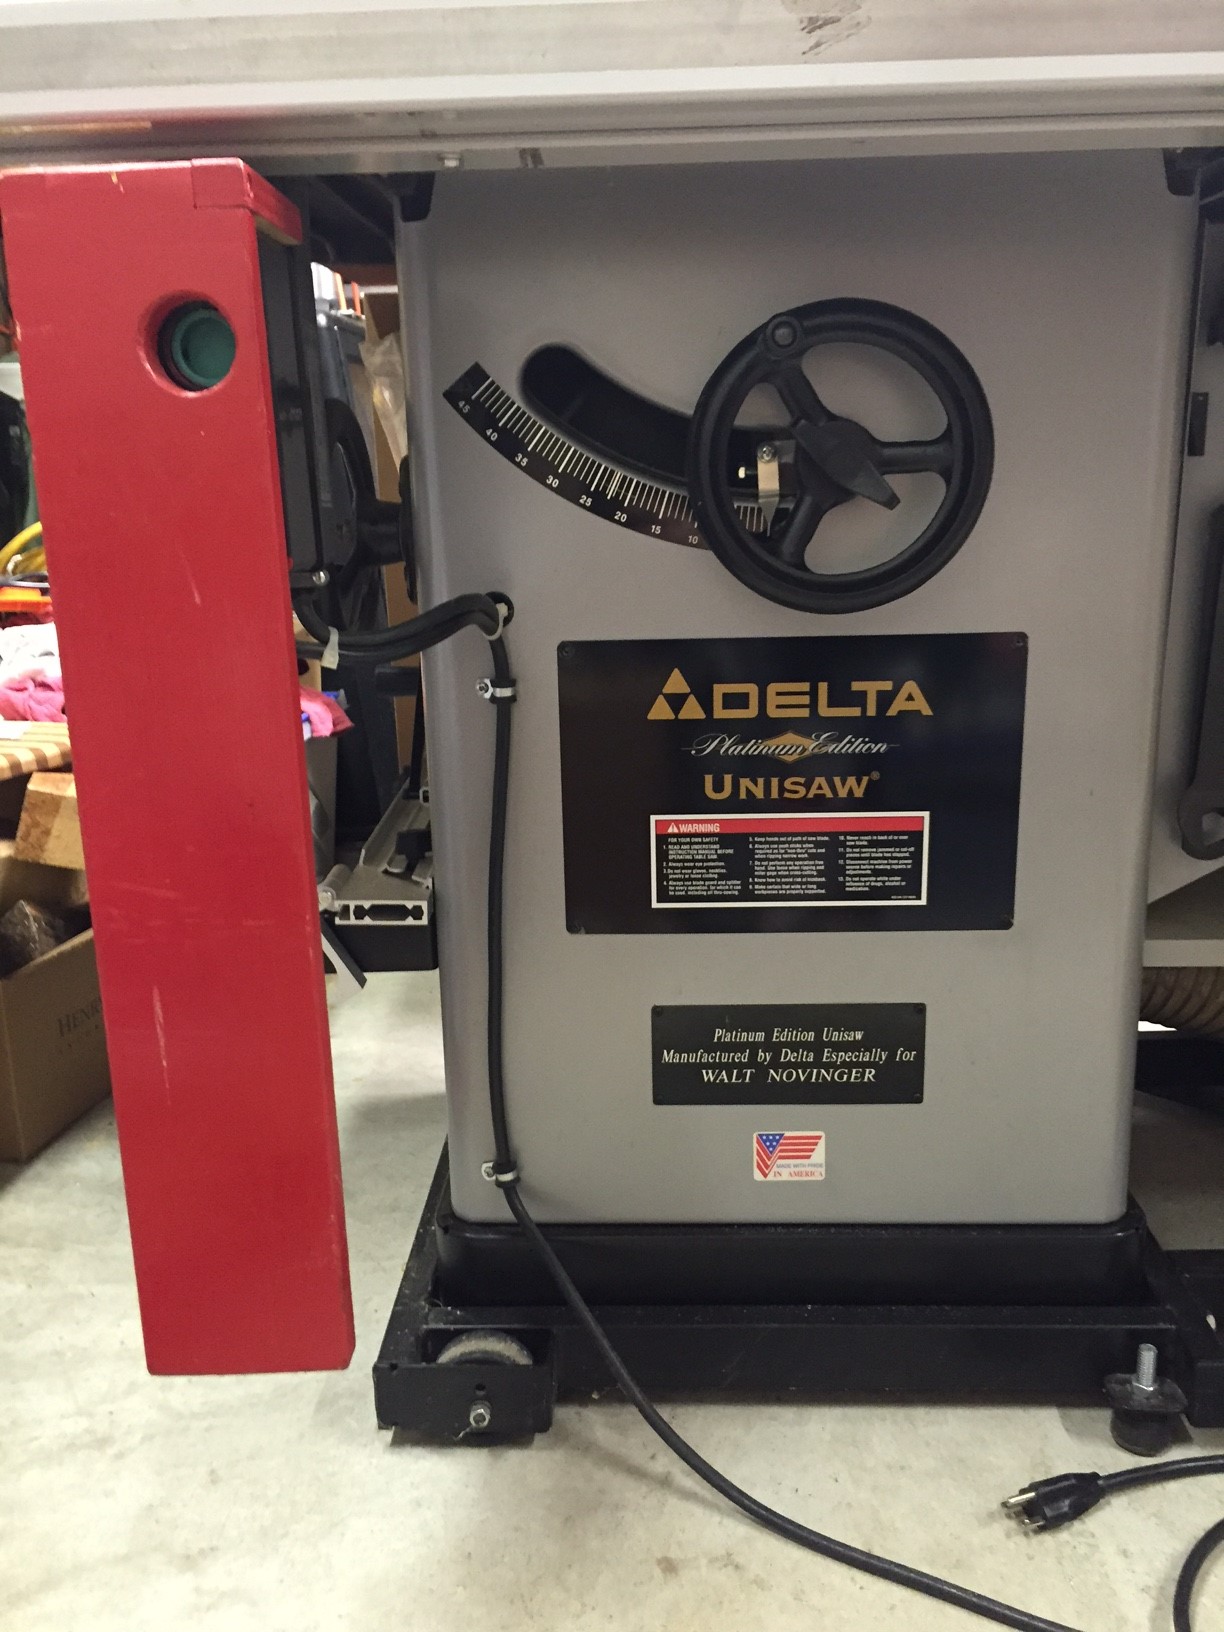 Delta Unisaw Platinum Edition and JessEm Router Lift w/ Porter Cable Router